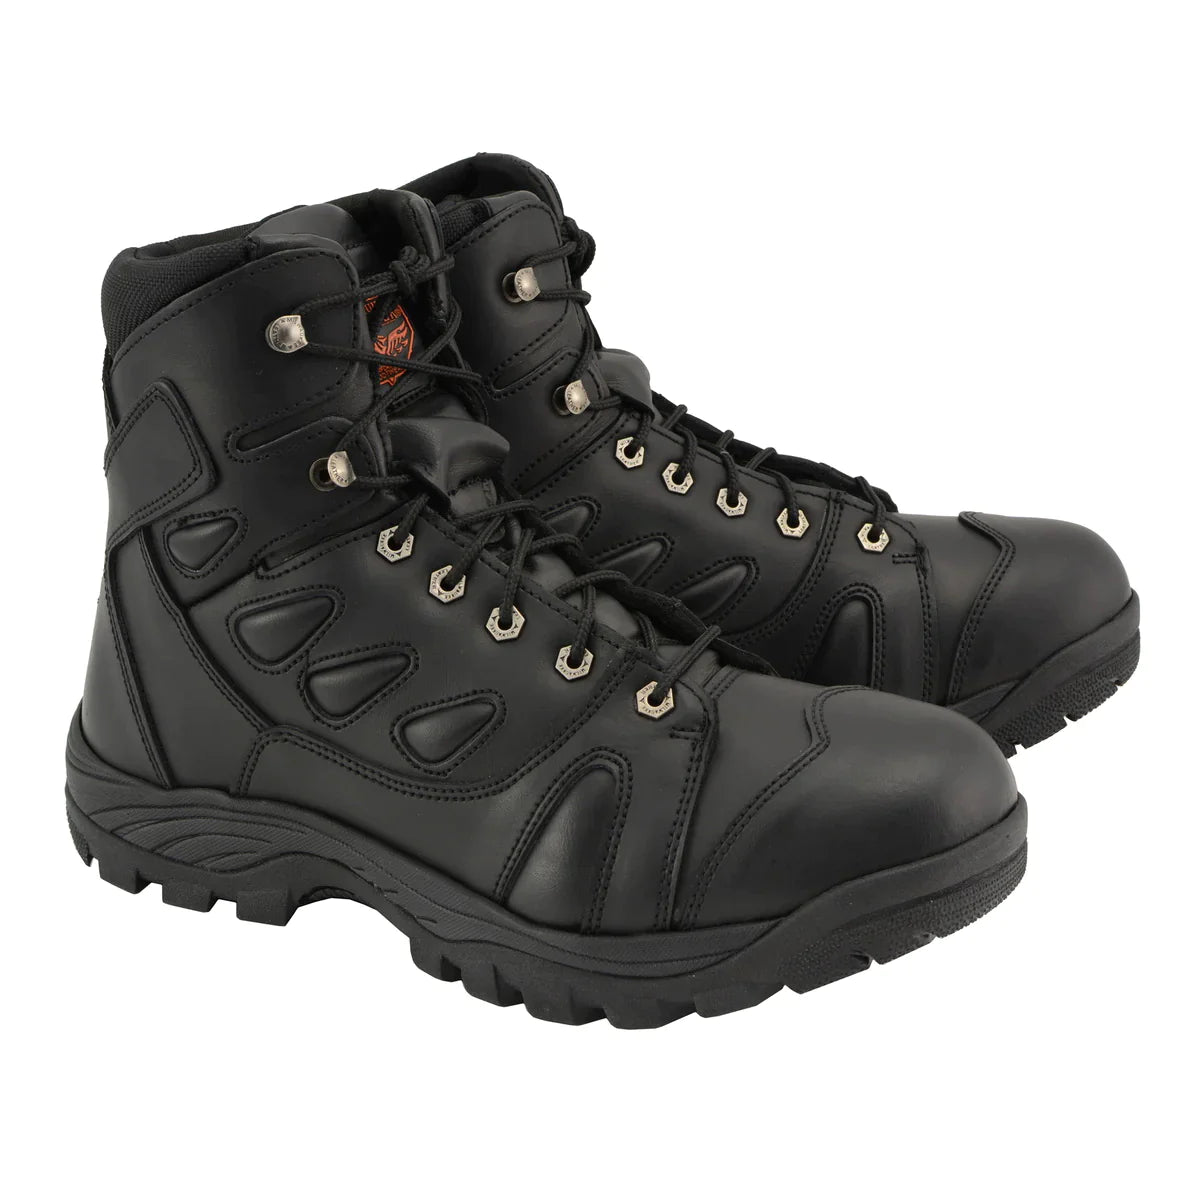 Men's Black 6 inch All Leather Tactical Boots